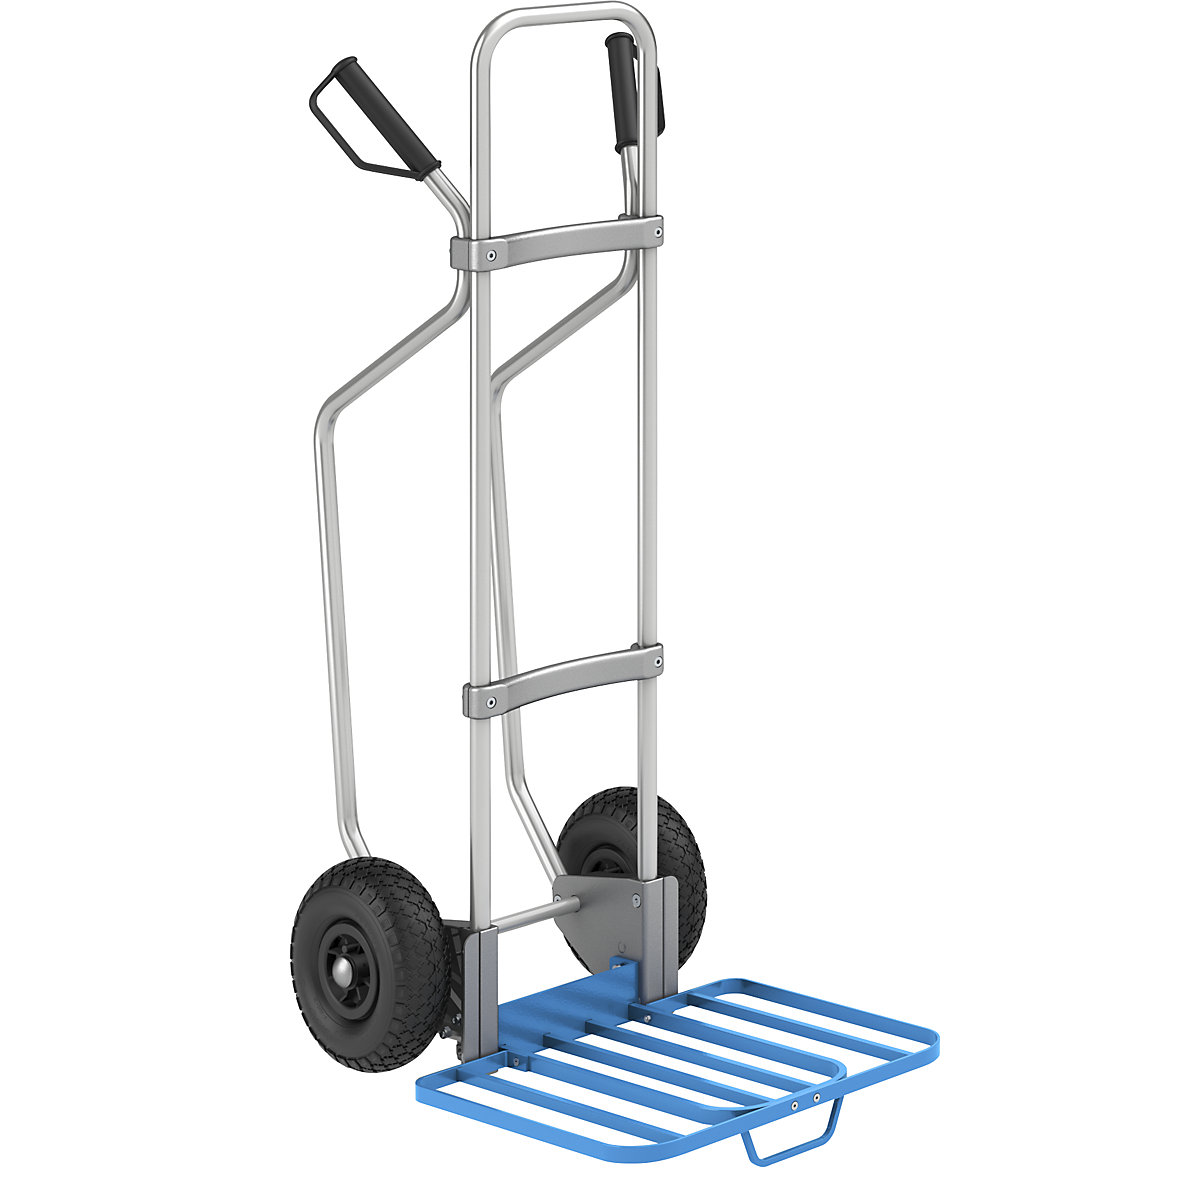 Aluminium sack truck with runners – eurokraft pro, parcel footplate WxD 430 x 450 mm, blue, with handle, pneumatic tyres-1